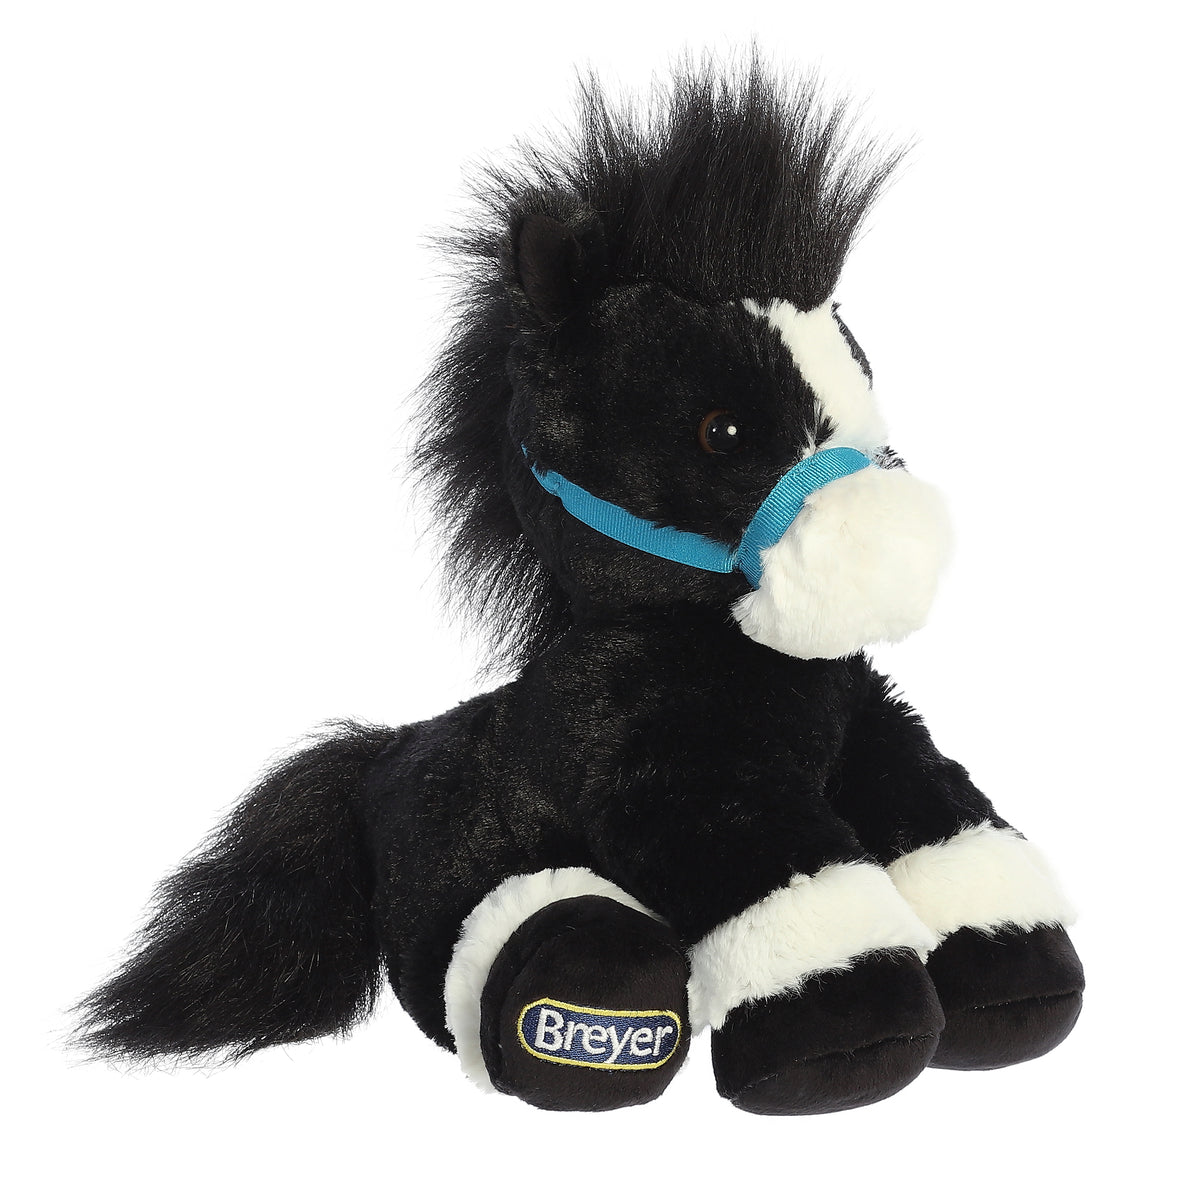 An adorably seated black and white Breyer black horse plush with a black coat, a white snout, and baby blue reigns.